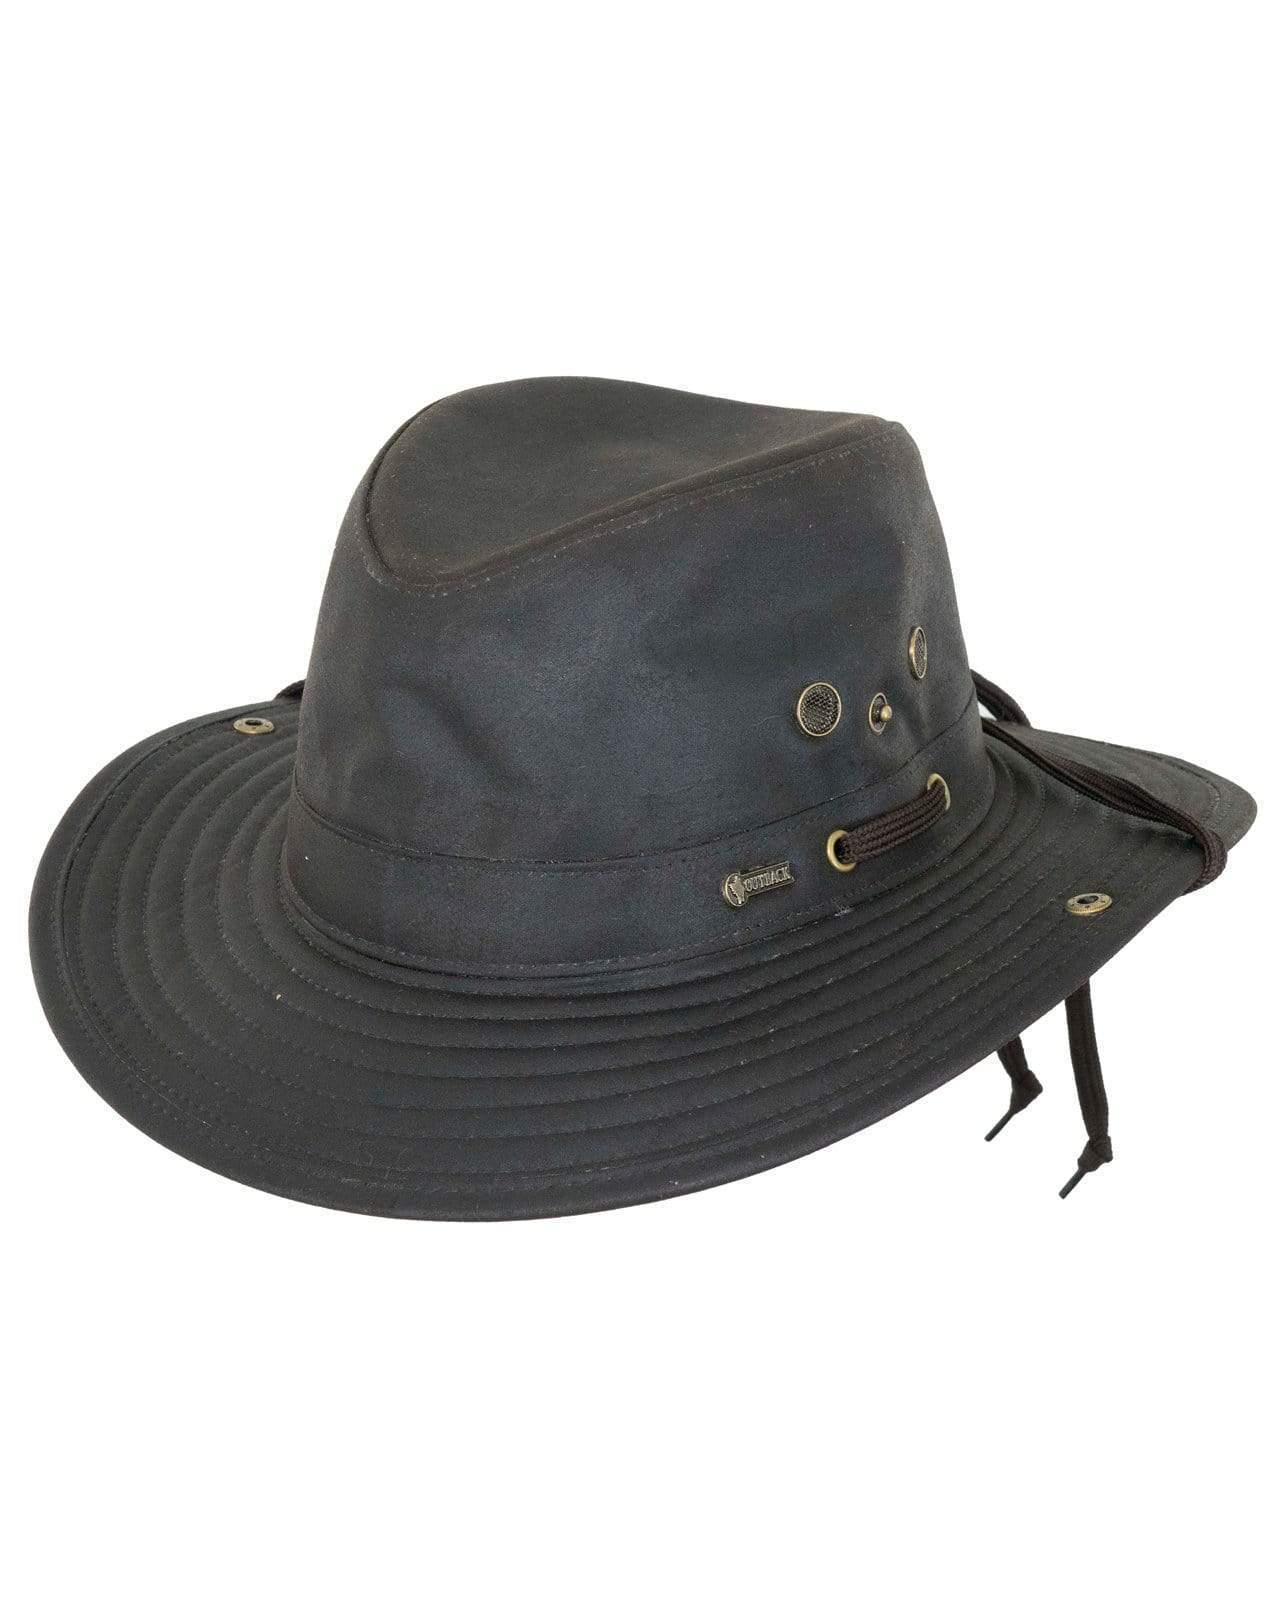 Outback Trading Oilskin River Guide Hat Field Tan XL